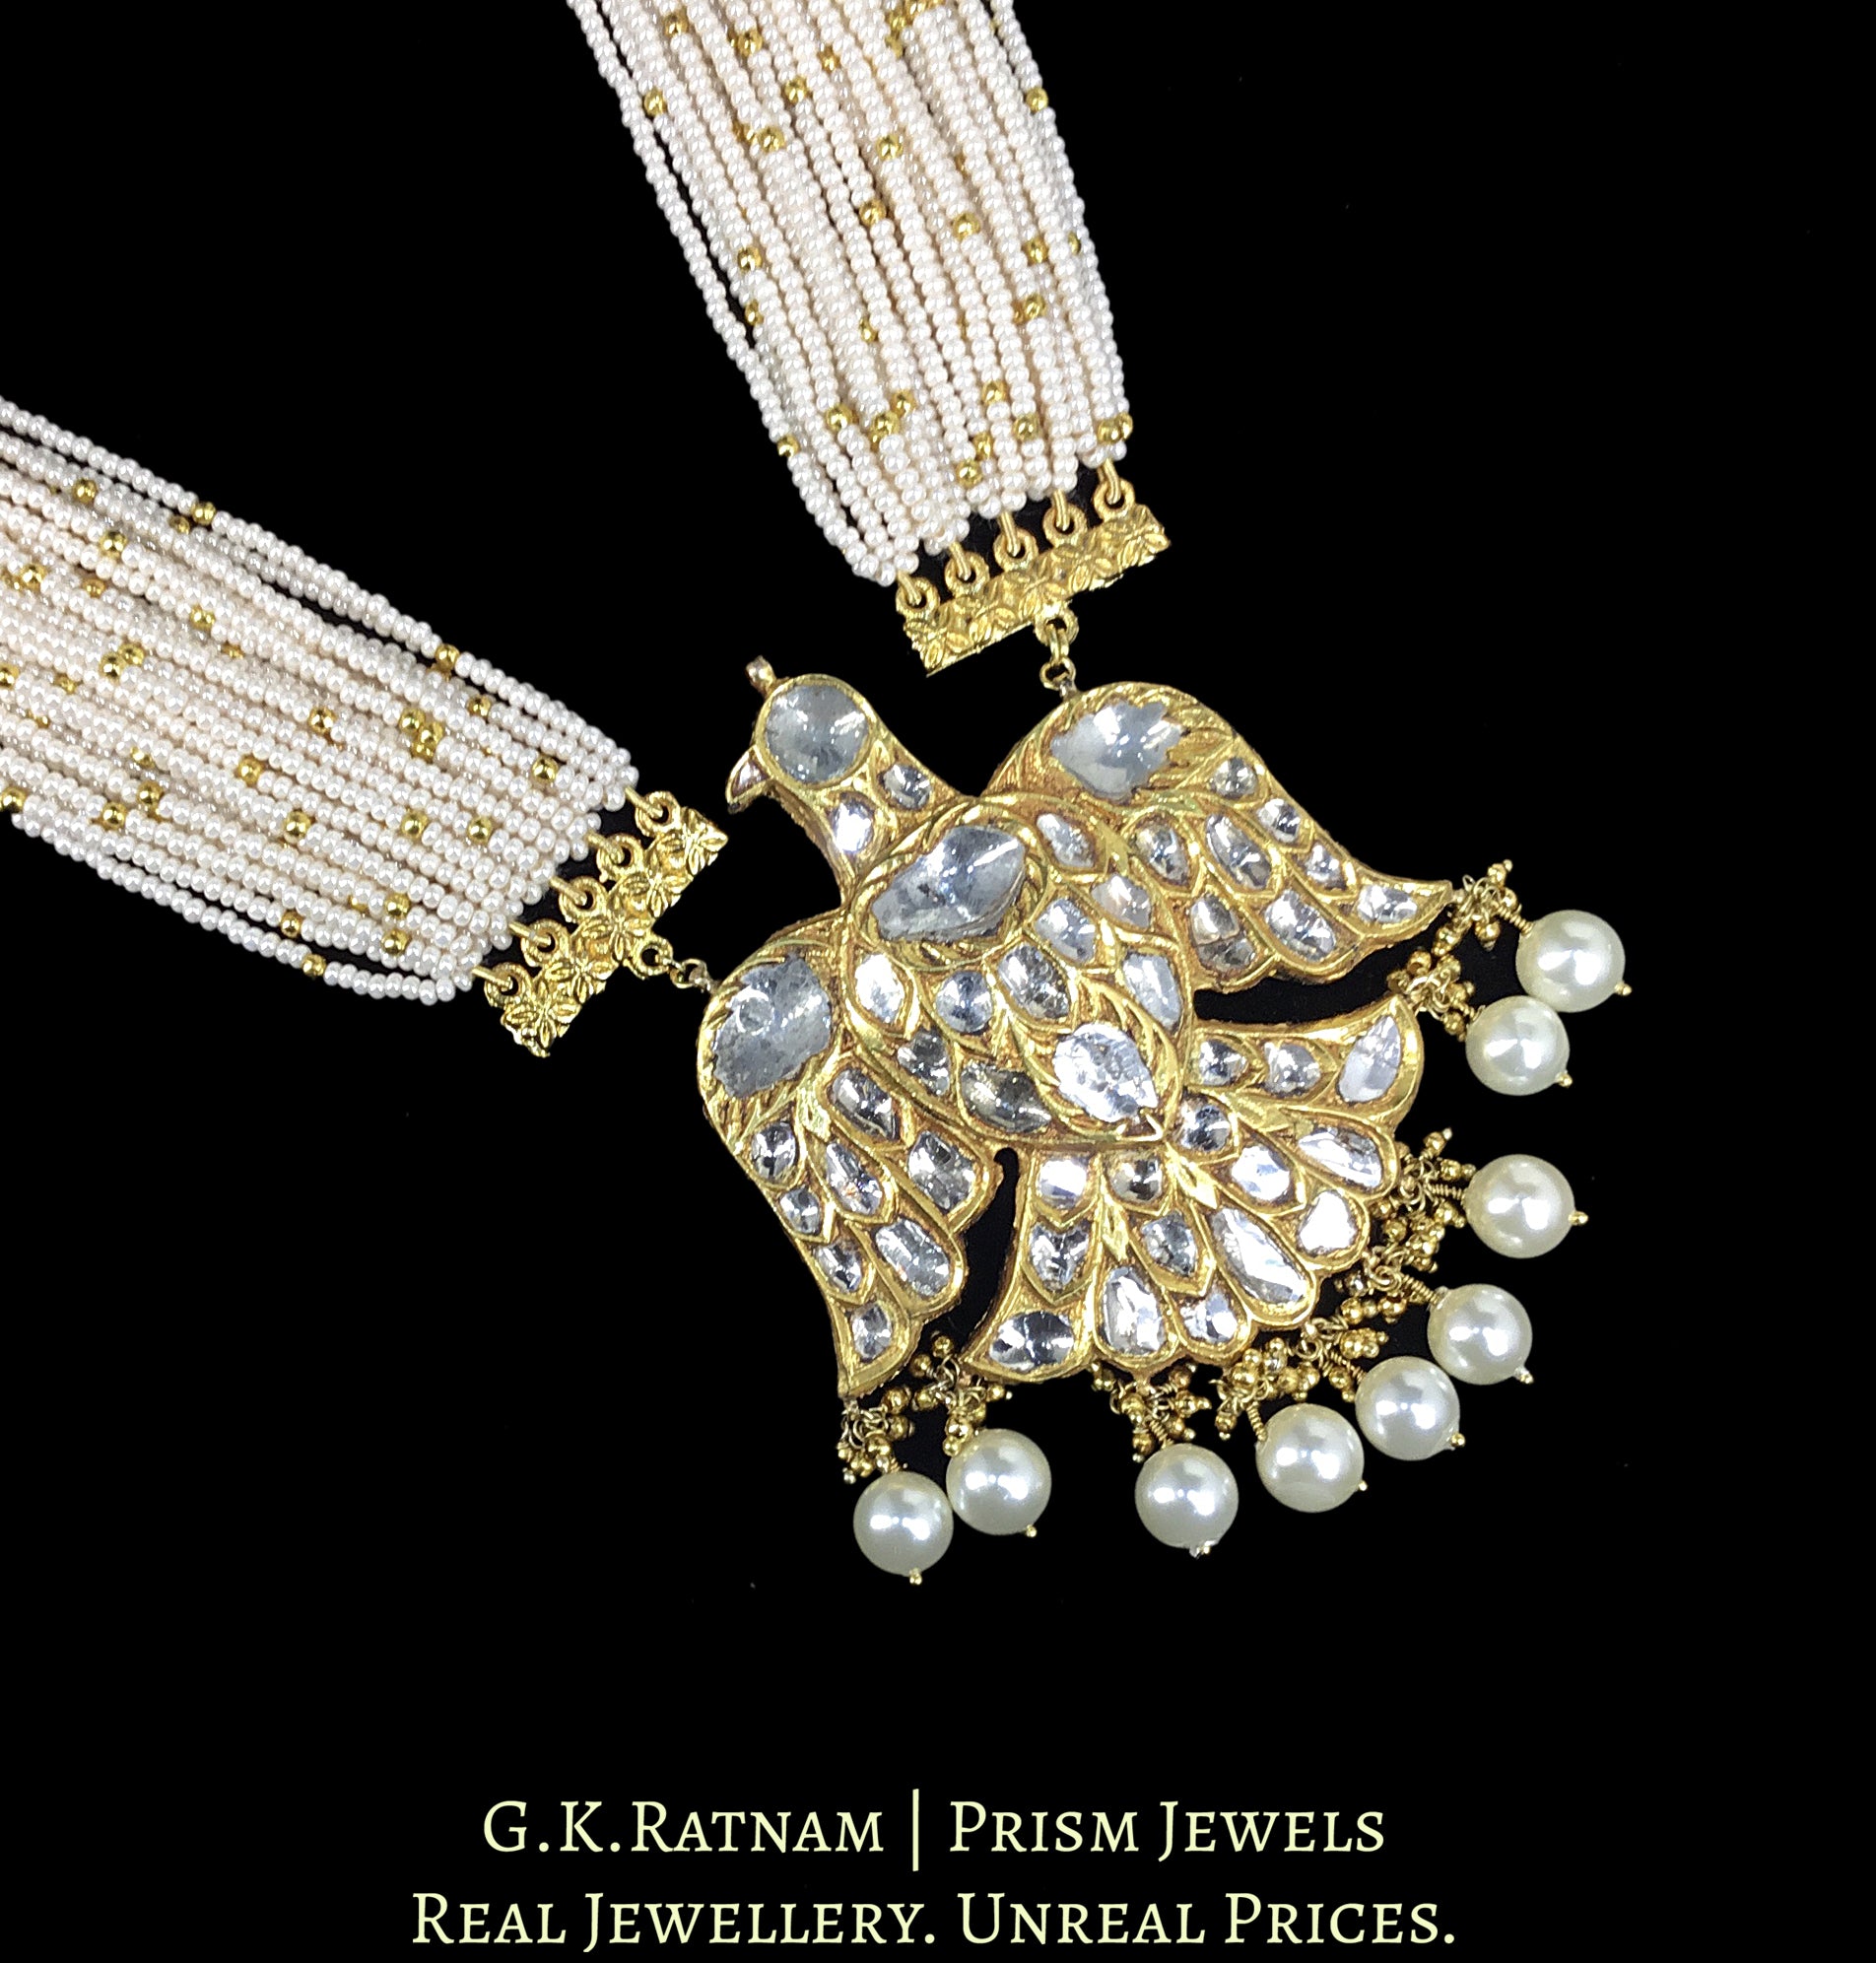 23k Gold and Diamond Polki Baaz Pendant with Chid Bunches